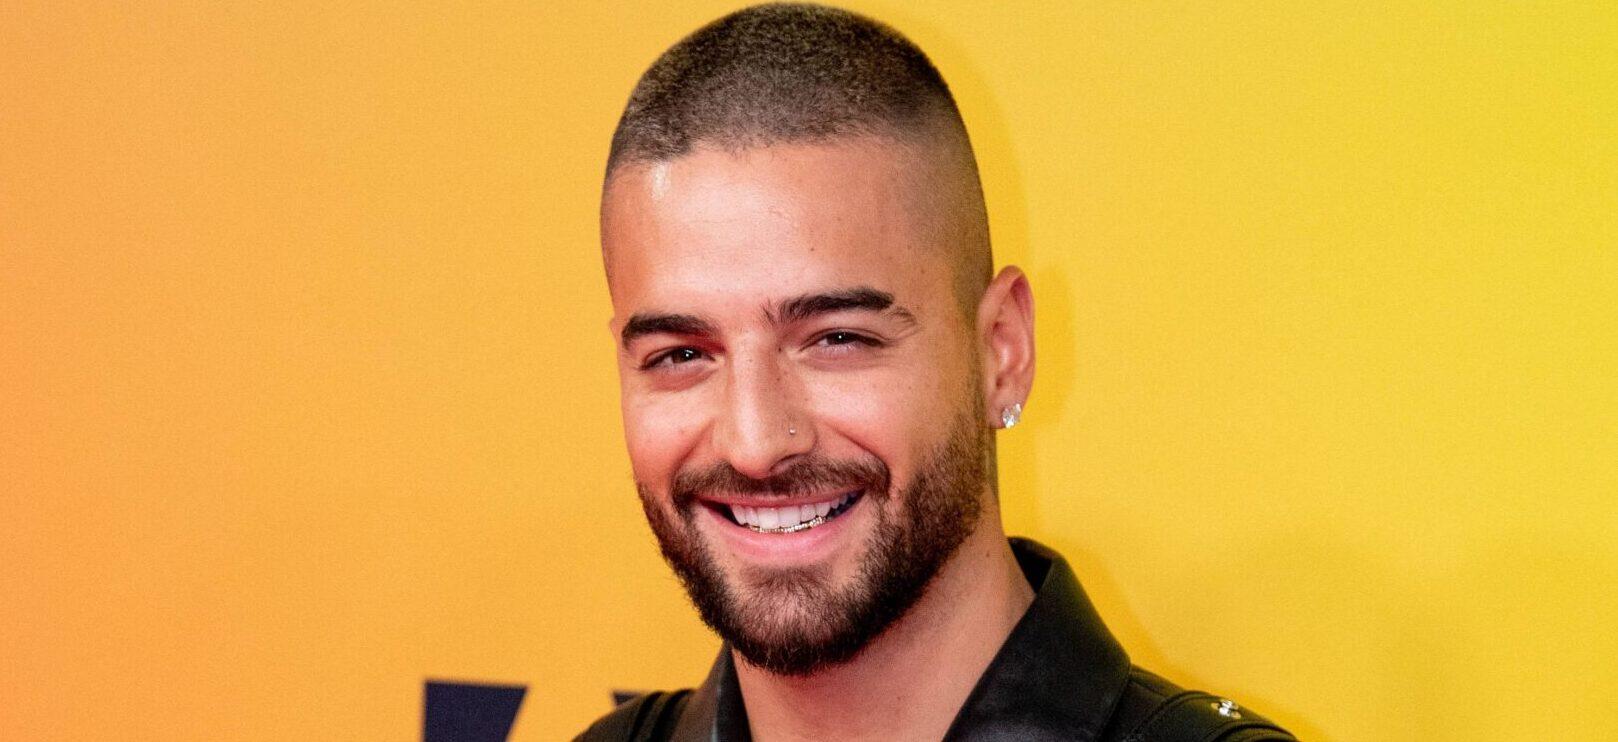 Maluma In Nothing But A Towel Calls Himself ‘Dirty Boy’